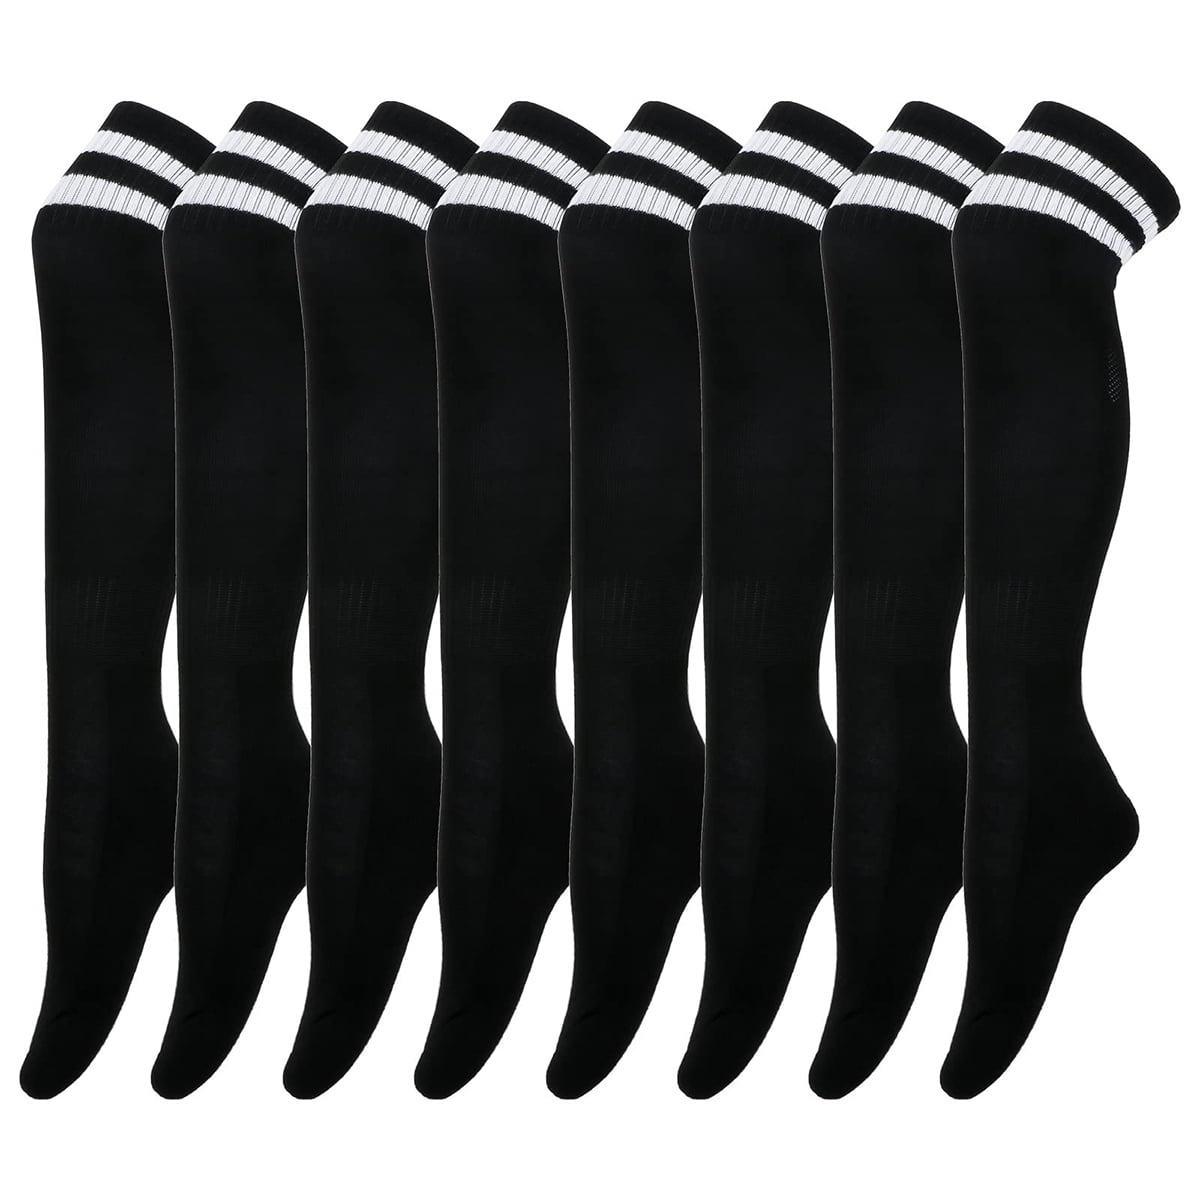 Grip Socks Soccer Kids Football Socks Calf Socks With Silicone Anti-slip  Strip Pressurized Protection Stretch Woven Suitable for Running Football  show